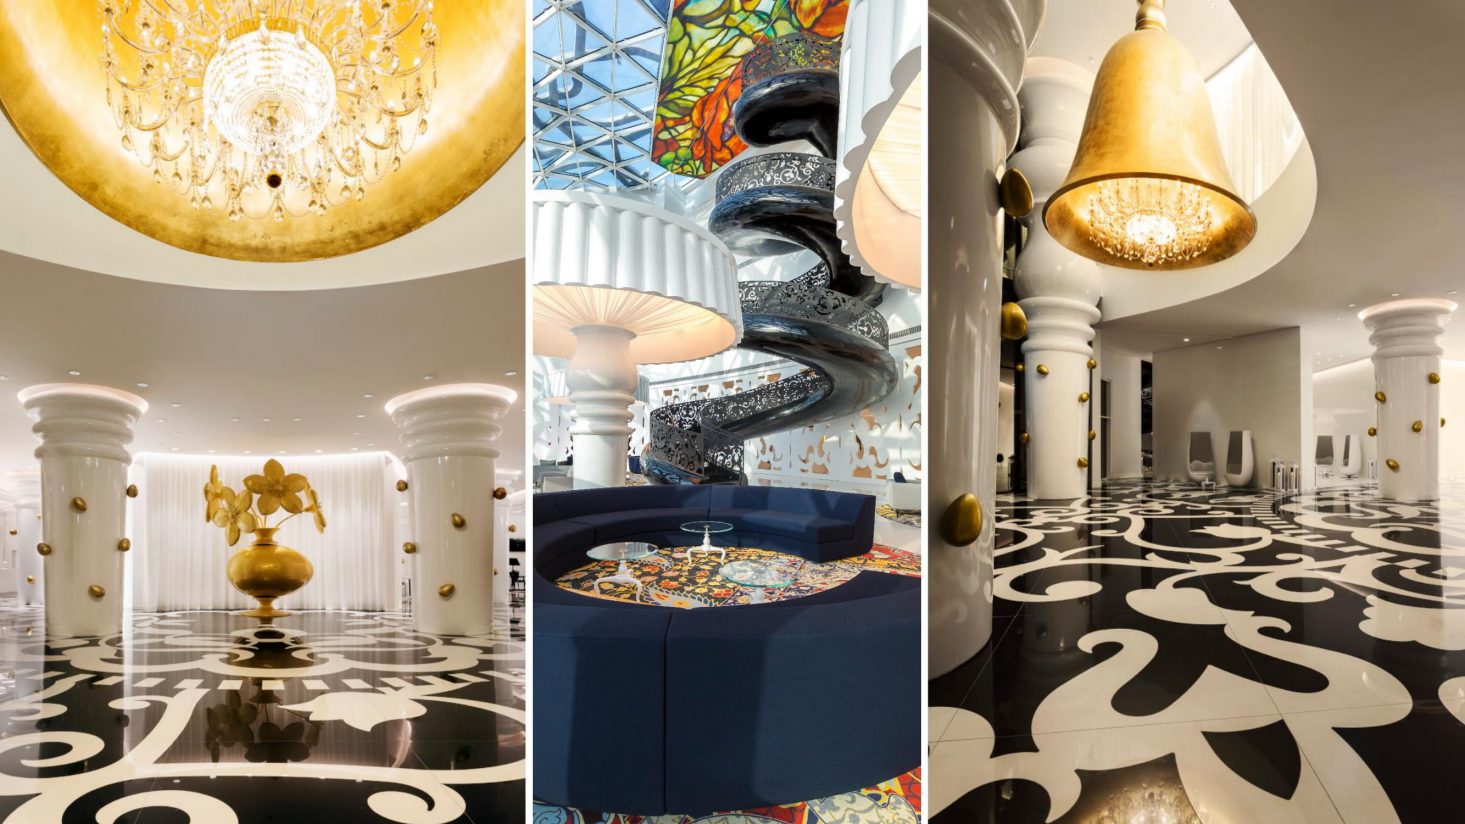 Marcel Wanders says Mondrian Doha hotel is a place of fantasy